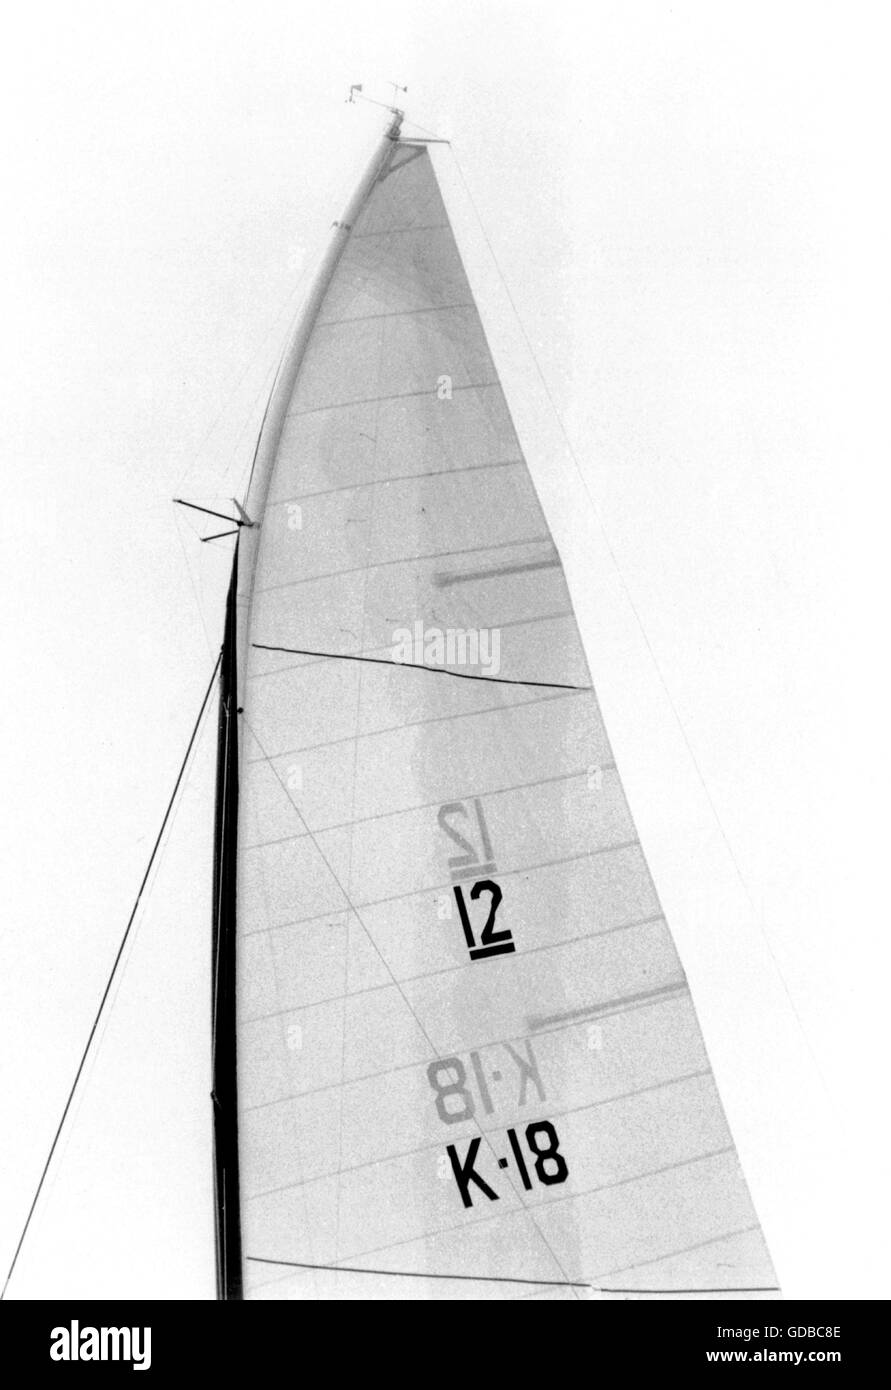 AJAX NEWS PHOTOS. 5TH JUL, 1980.  SOUTHAMPTON, ENGLAND. - AMERICA'S CUP CHALLENGER NEW WEAPON - BRITISH 12M  LIONHEART FITTED EXTRA BENDY SECTION TO HER MAST TOP. PHOTO:JONATHAN EASTLAND/AJAX  REF:YA LIONHEART MAST 80 Stock Photo